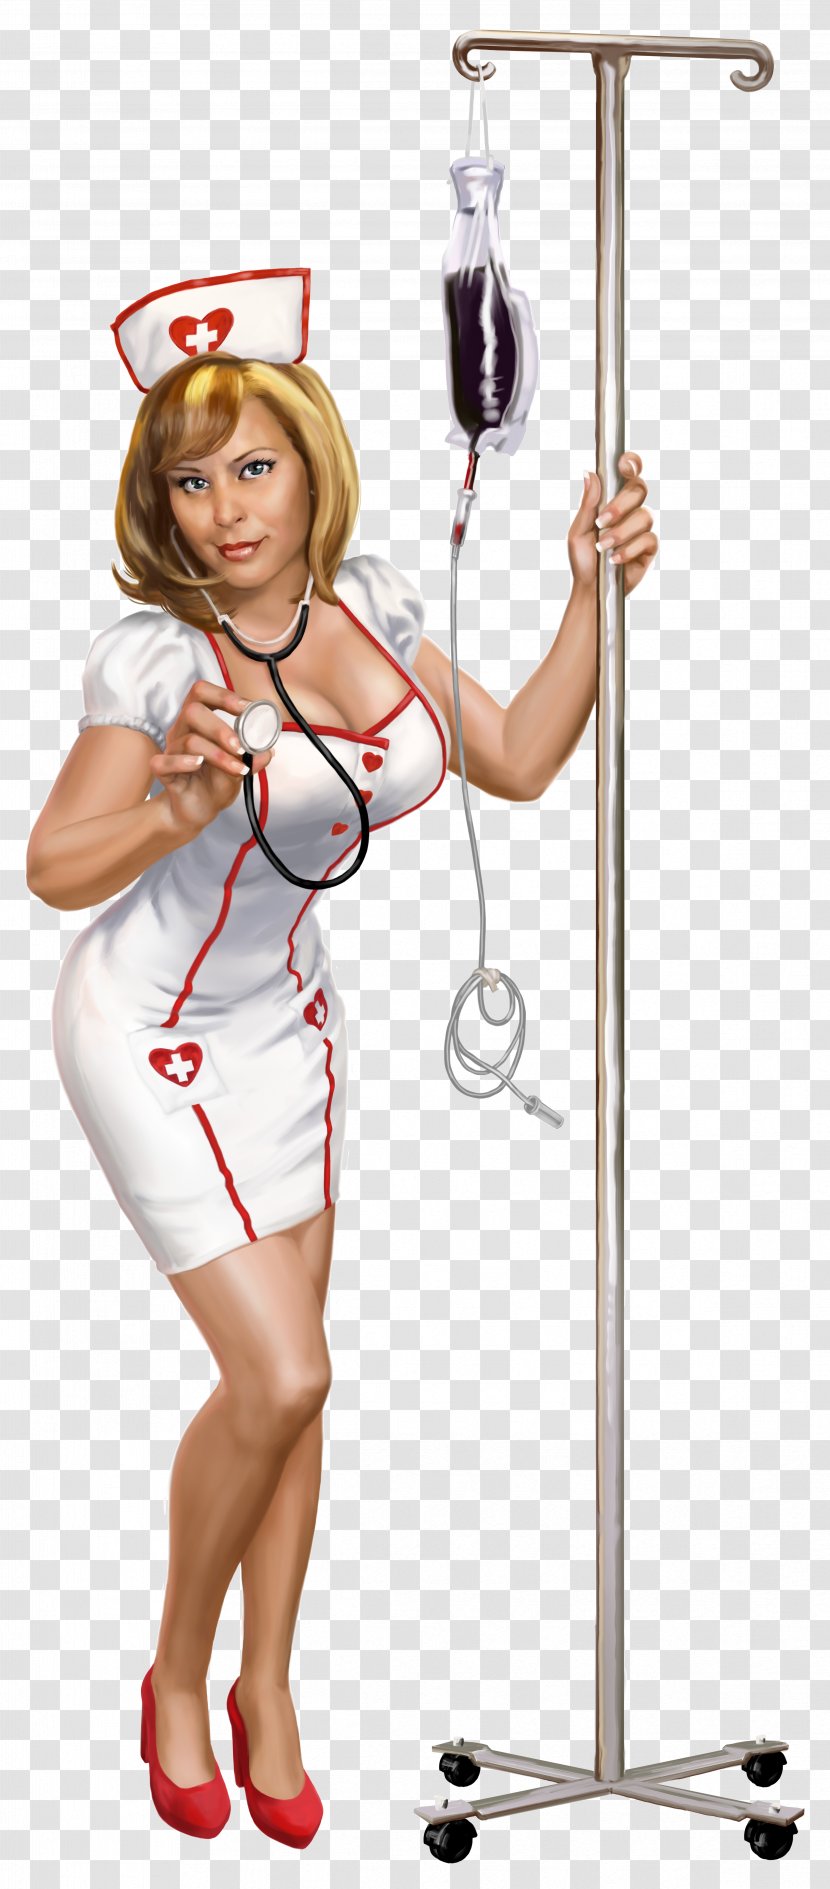 Heart Attack Grill Hamburger French Fries Restaurant Nurse - Tobacco Smoking Transparent PNG